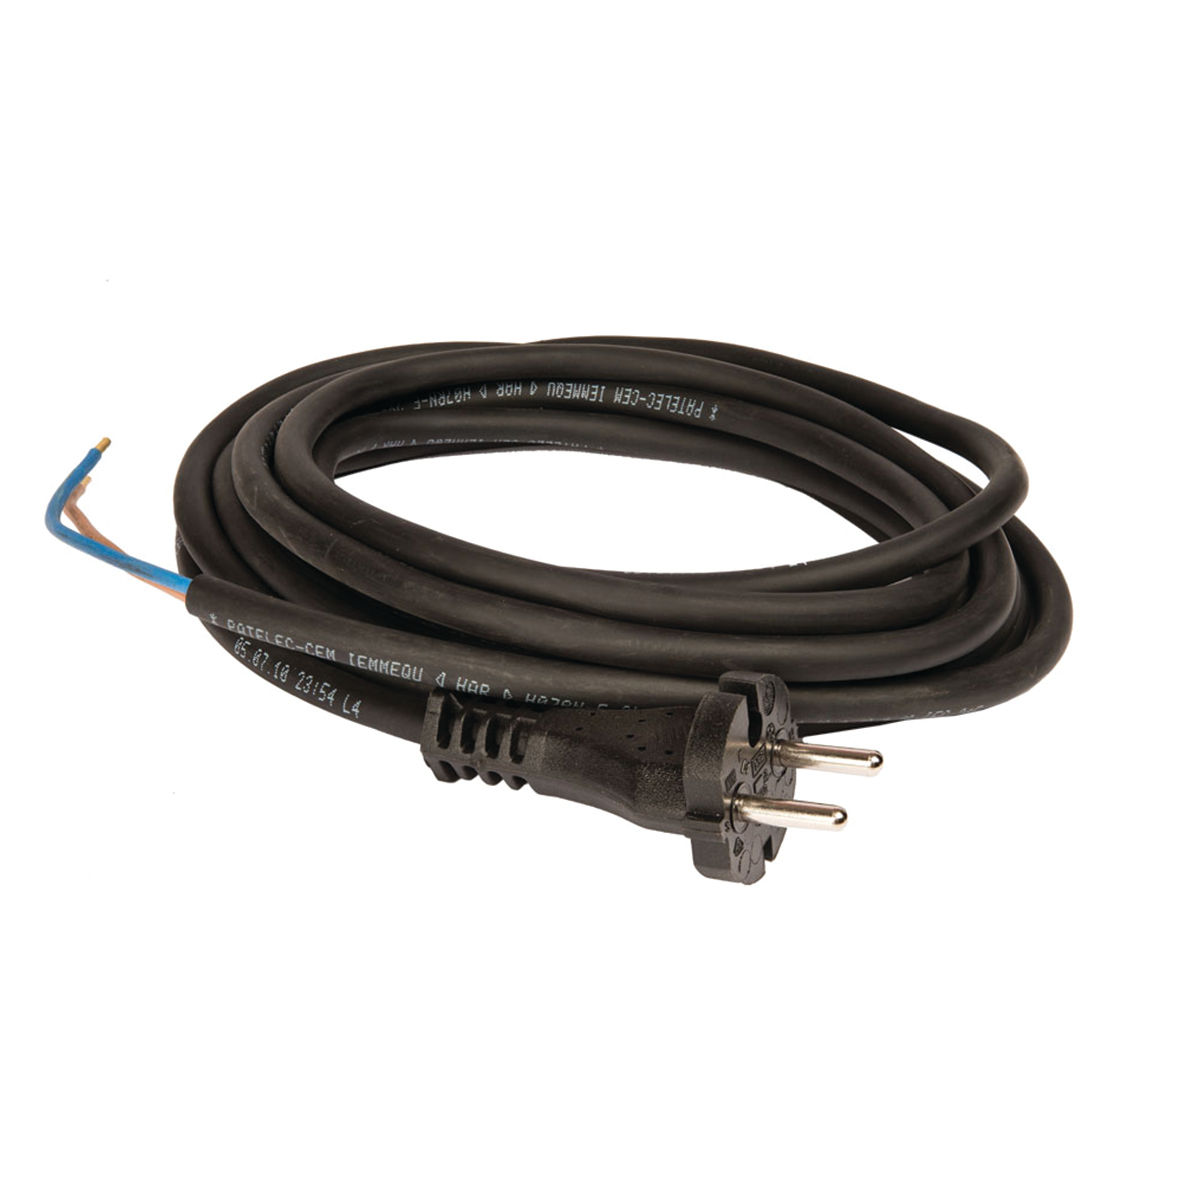 Cable Compl. No. 5 for PS 1437